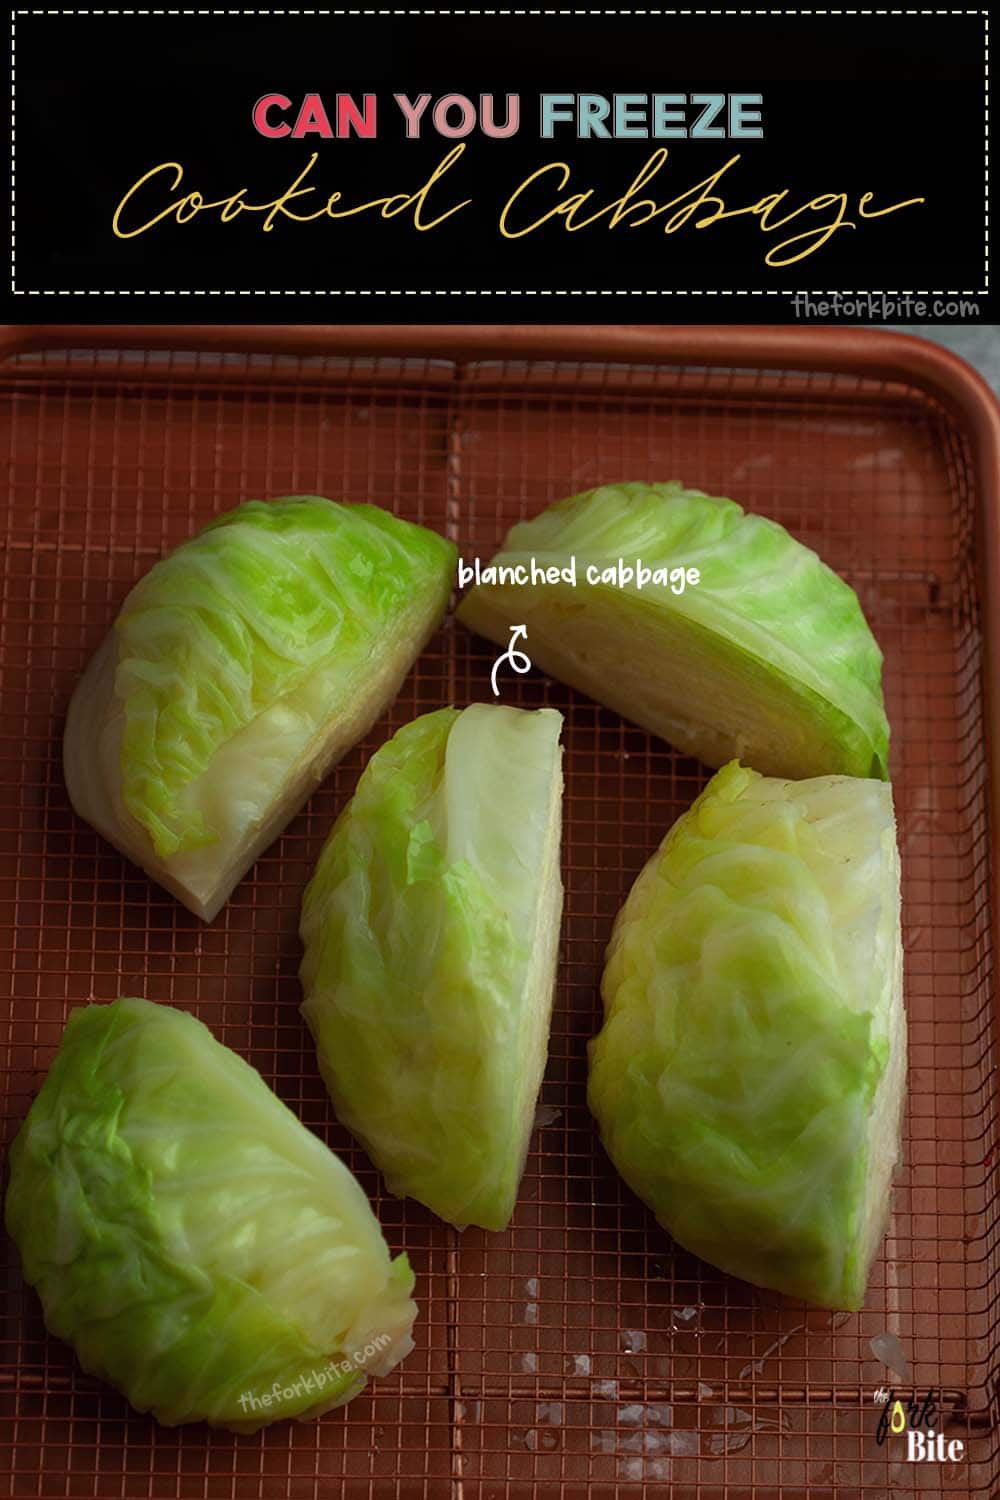 As long as the cooked thawed cabbage is not exposed to at least 40°F, you can refreeze it. Thawed and refrigerated cooked cabbage does well. You can refreeze it again as well.